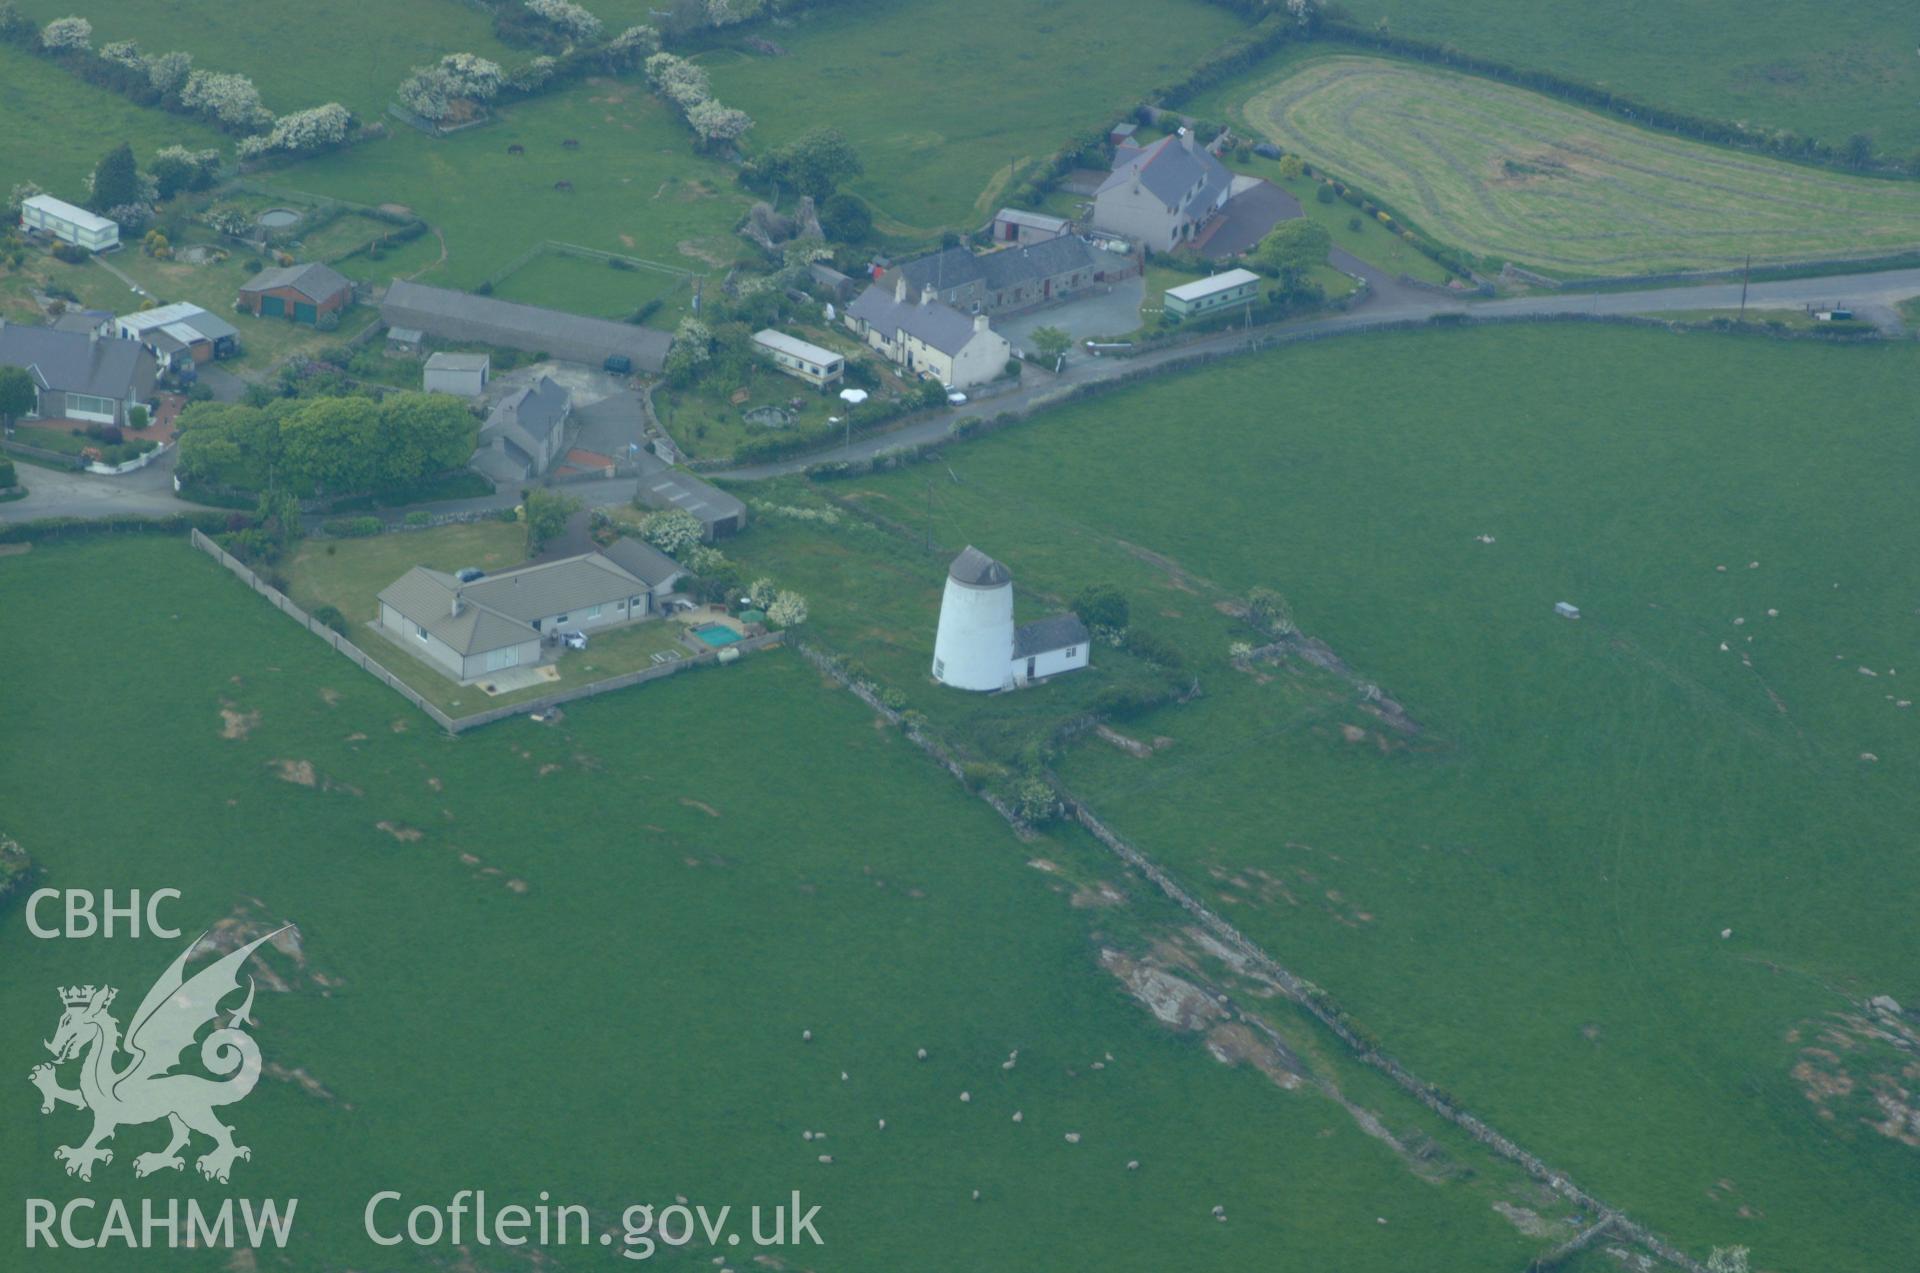 RCAHMW colour oblique aerial photograph of Disused Windmill, Mynydd Mechell. Taken on 26 May 2004 by Toby Driver